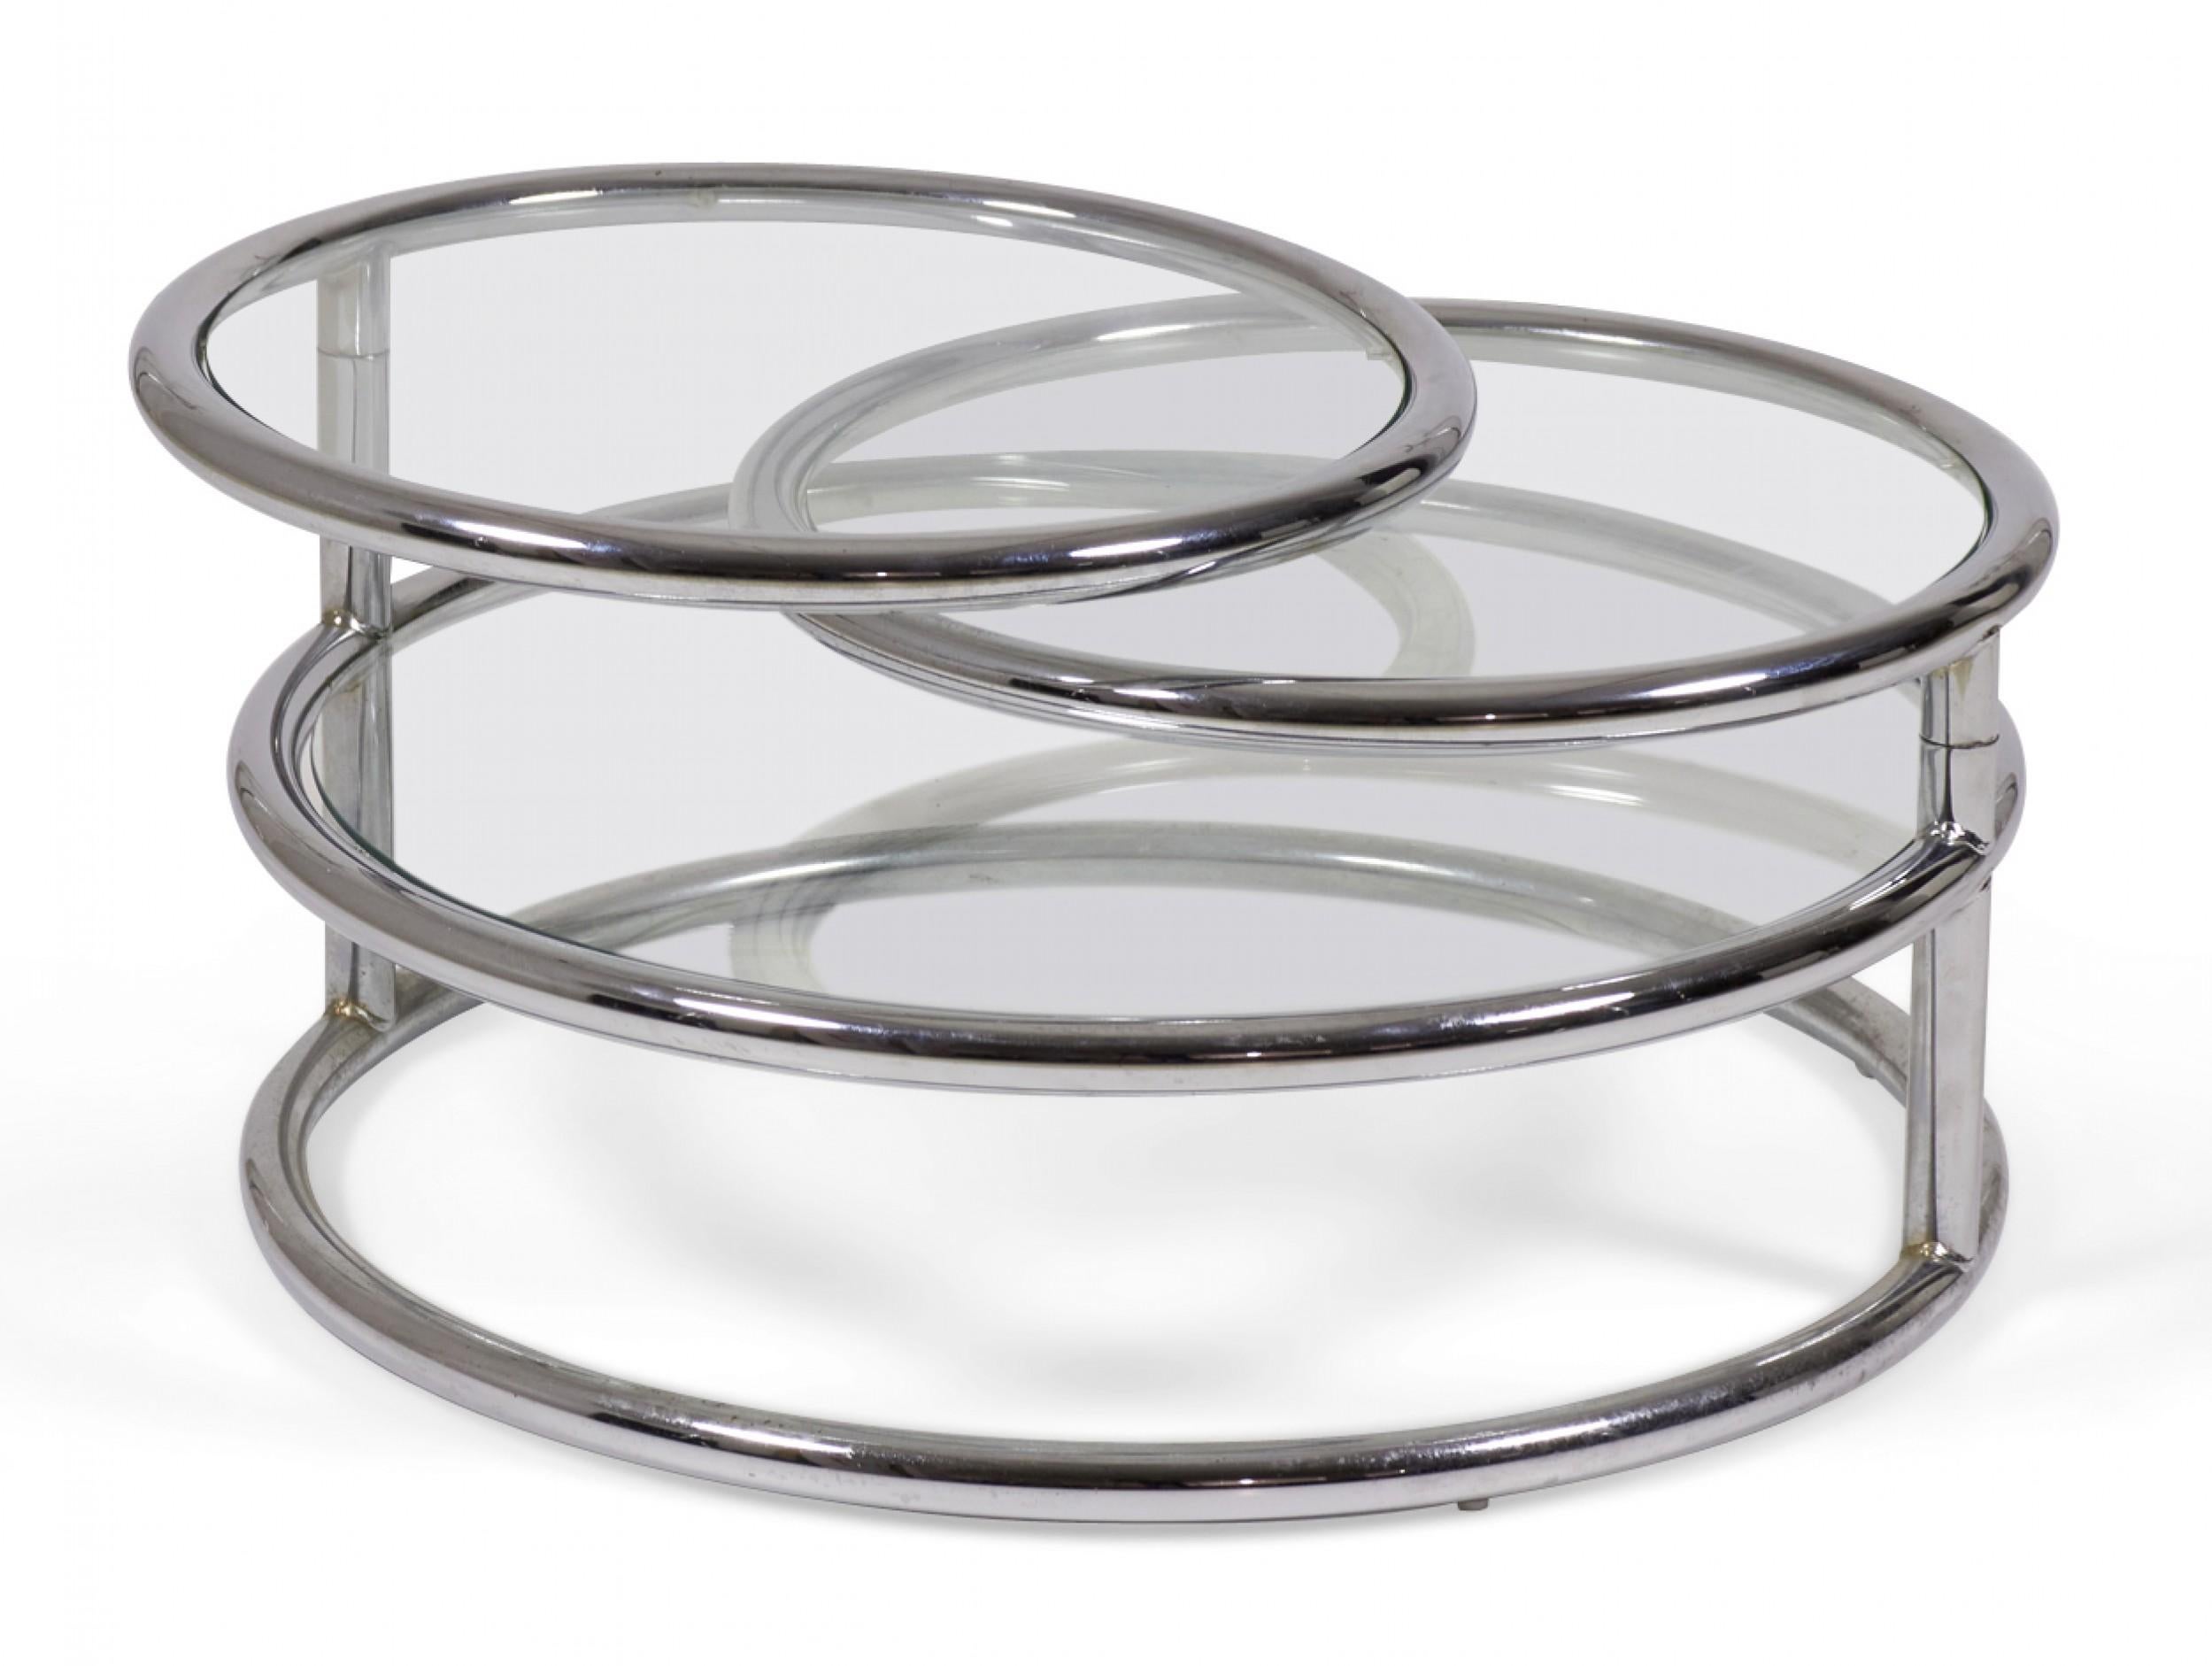 Pair of Italian Mid-Century Space Age-style (circa 1970) articulating 'Convertible' circular cocktail / coffee table with a chrome tube frame with four circular glass tabletops, the top two of which articulate on two vertical chrome supports.